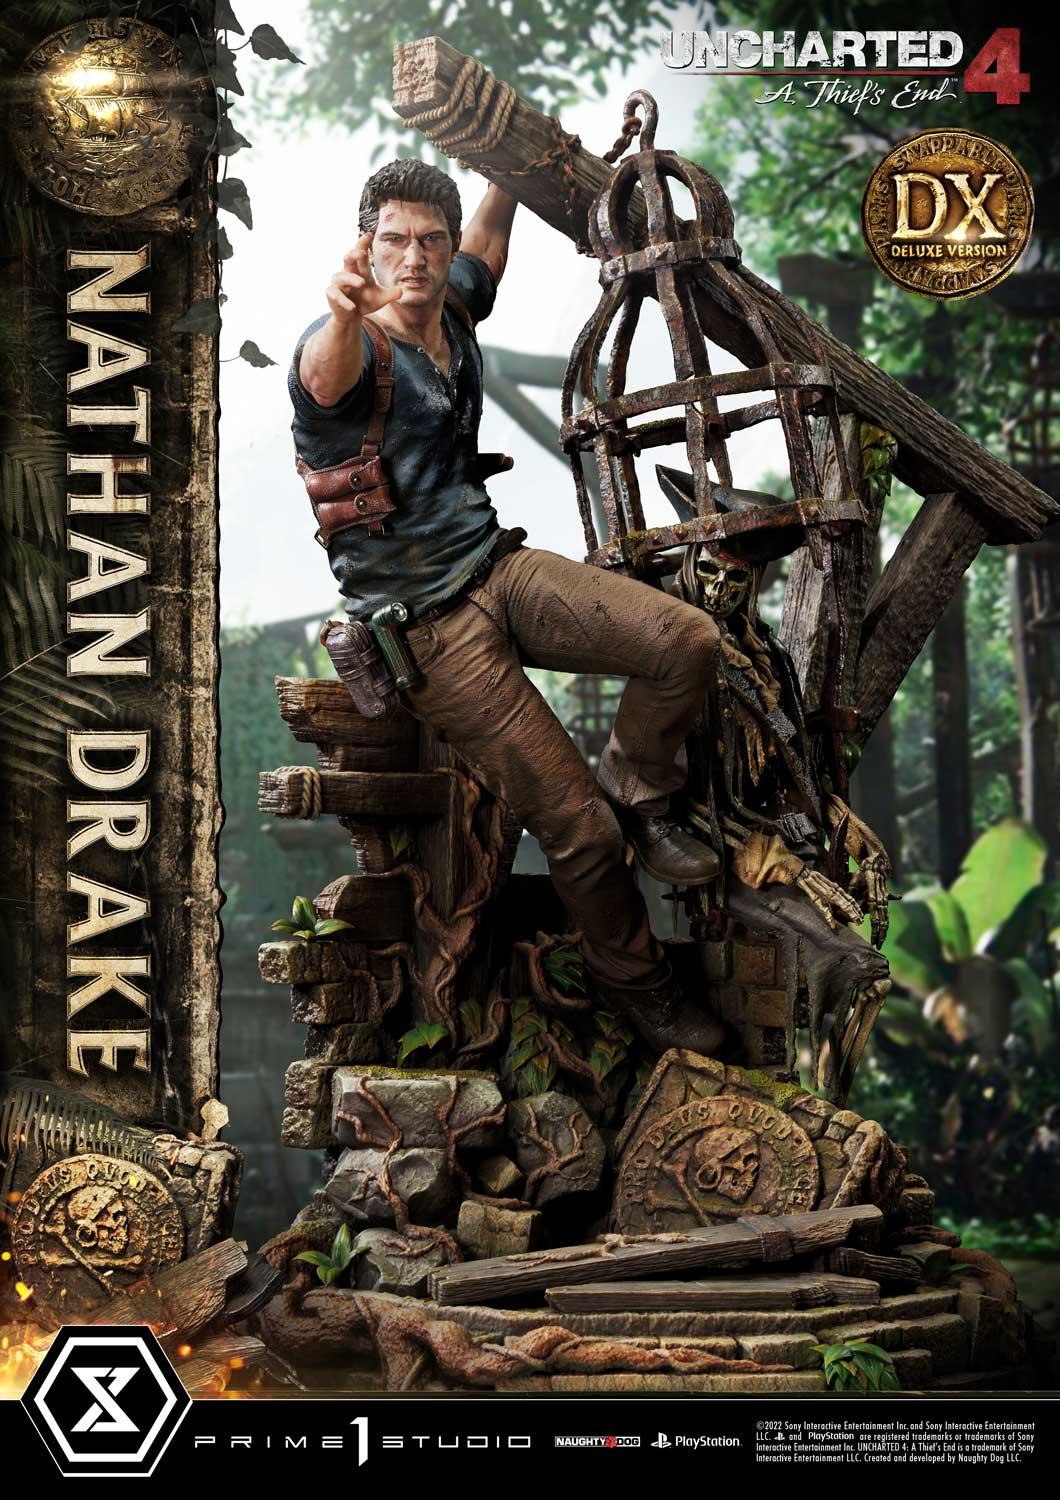 Prime Video: Uncharted